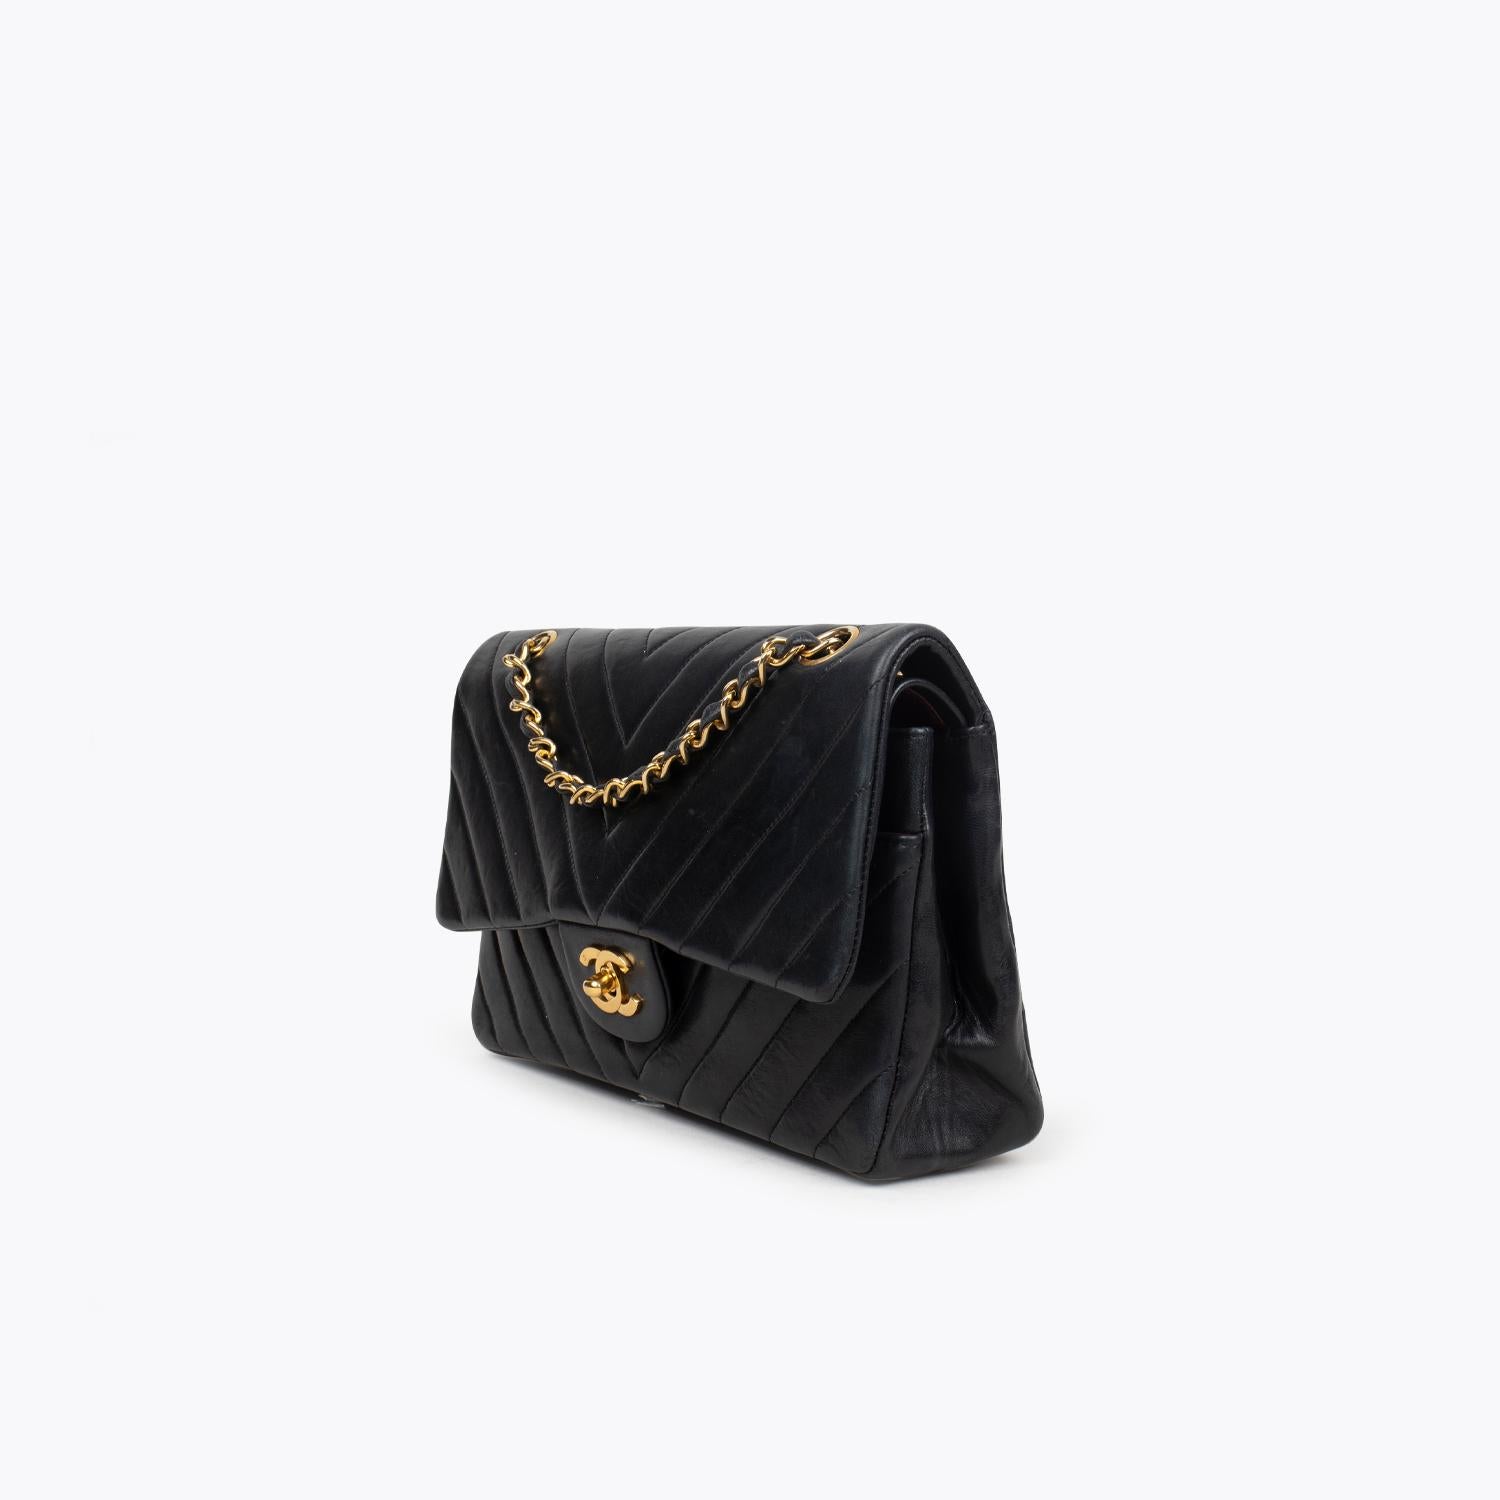 Black Chevron Quilted leather Chanel Medium Double Flap shoulder bag with

- Gold-tone hardware
- Single convertible chain-link and leather shoulder strap
- Single slit pocket at exterior wall, dual pockets at flap underside; one with zip closure,